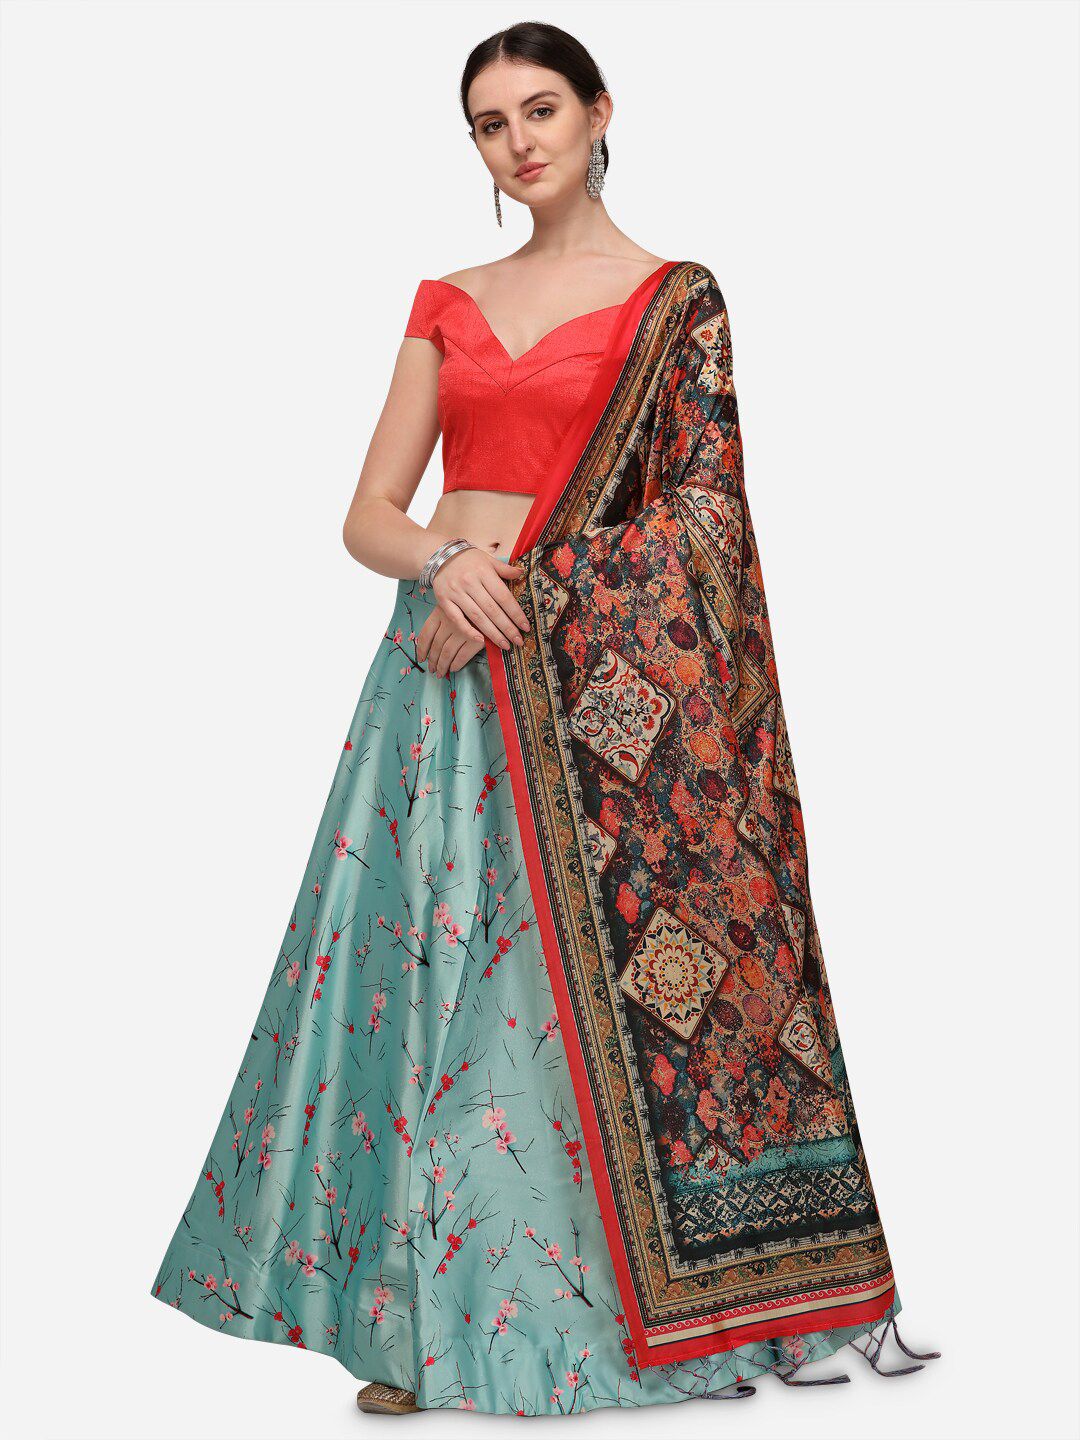 Mameraa Pink & Teal Printed Semi-Stitched Lehenga & Unstitched Blouse With Dupatta Price in India